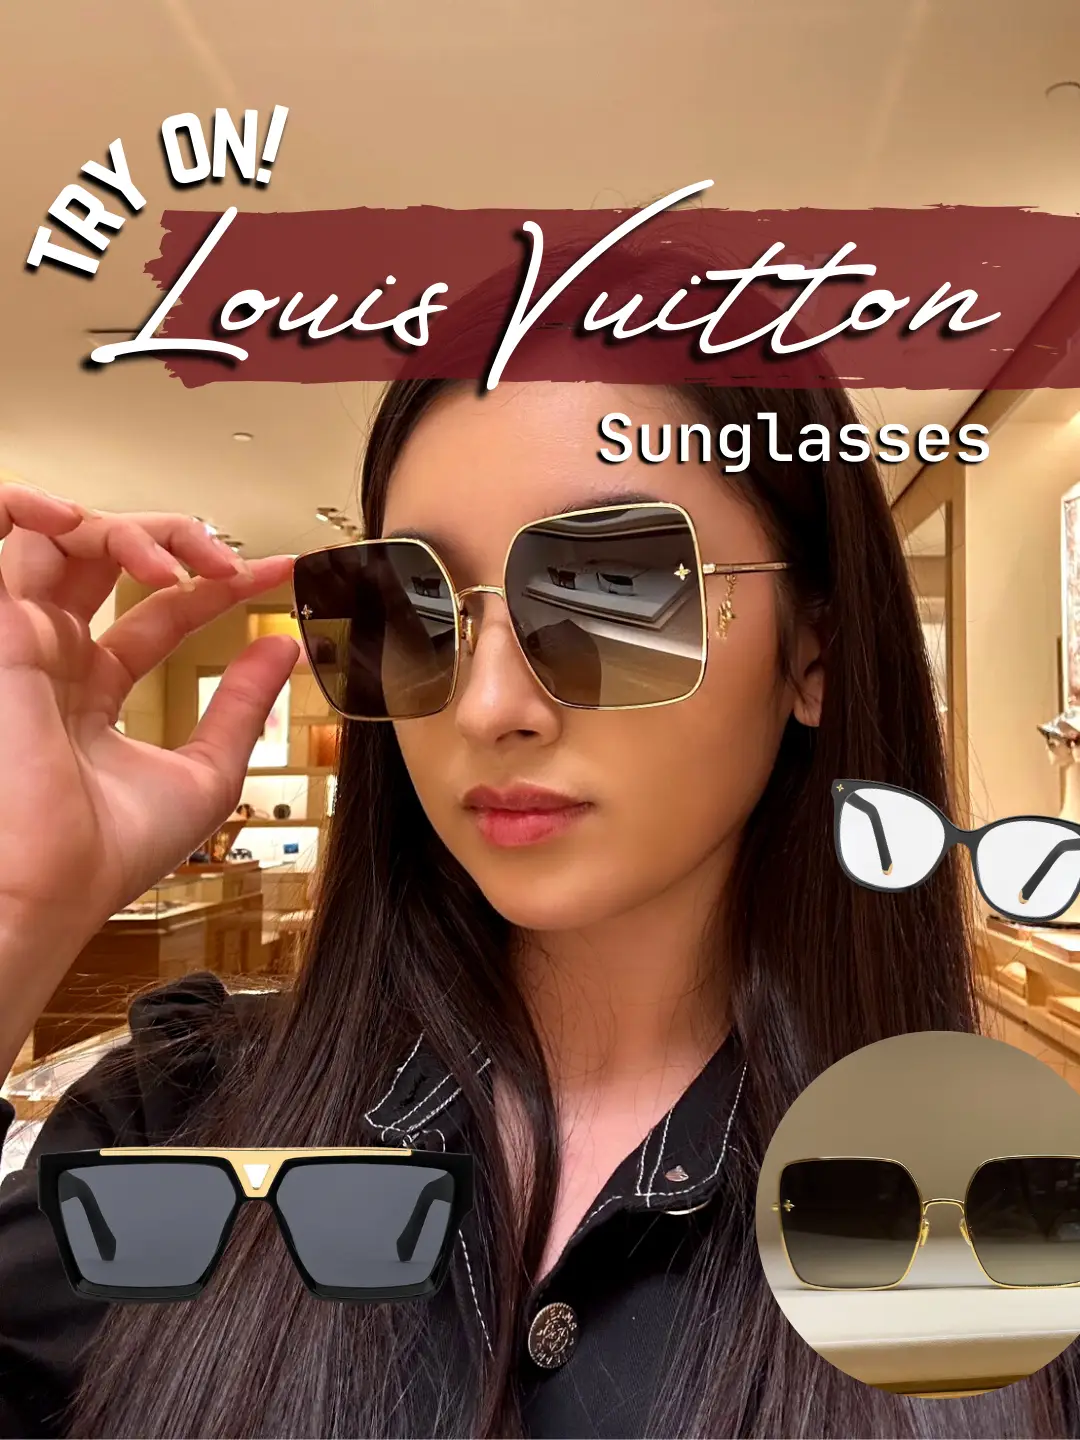 LV moon square sunglasses unboxing with details  Louis Vuitton new  collection #louisvuitton 